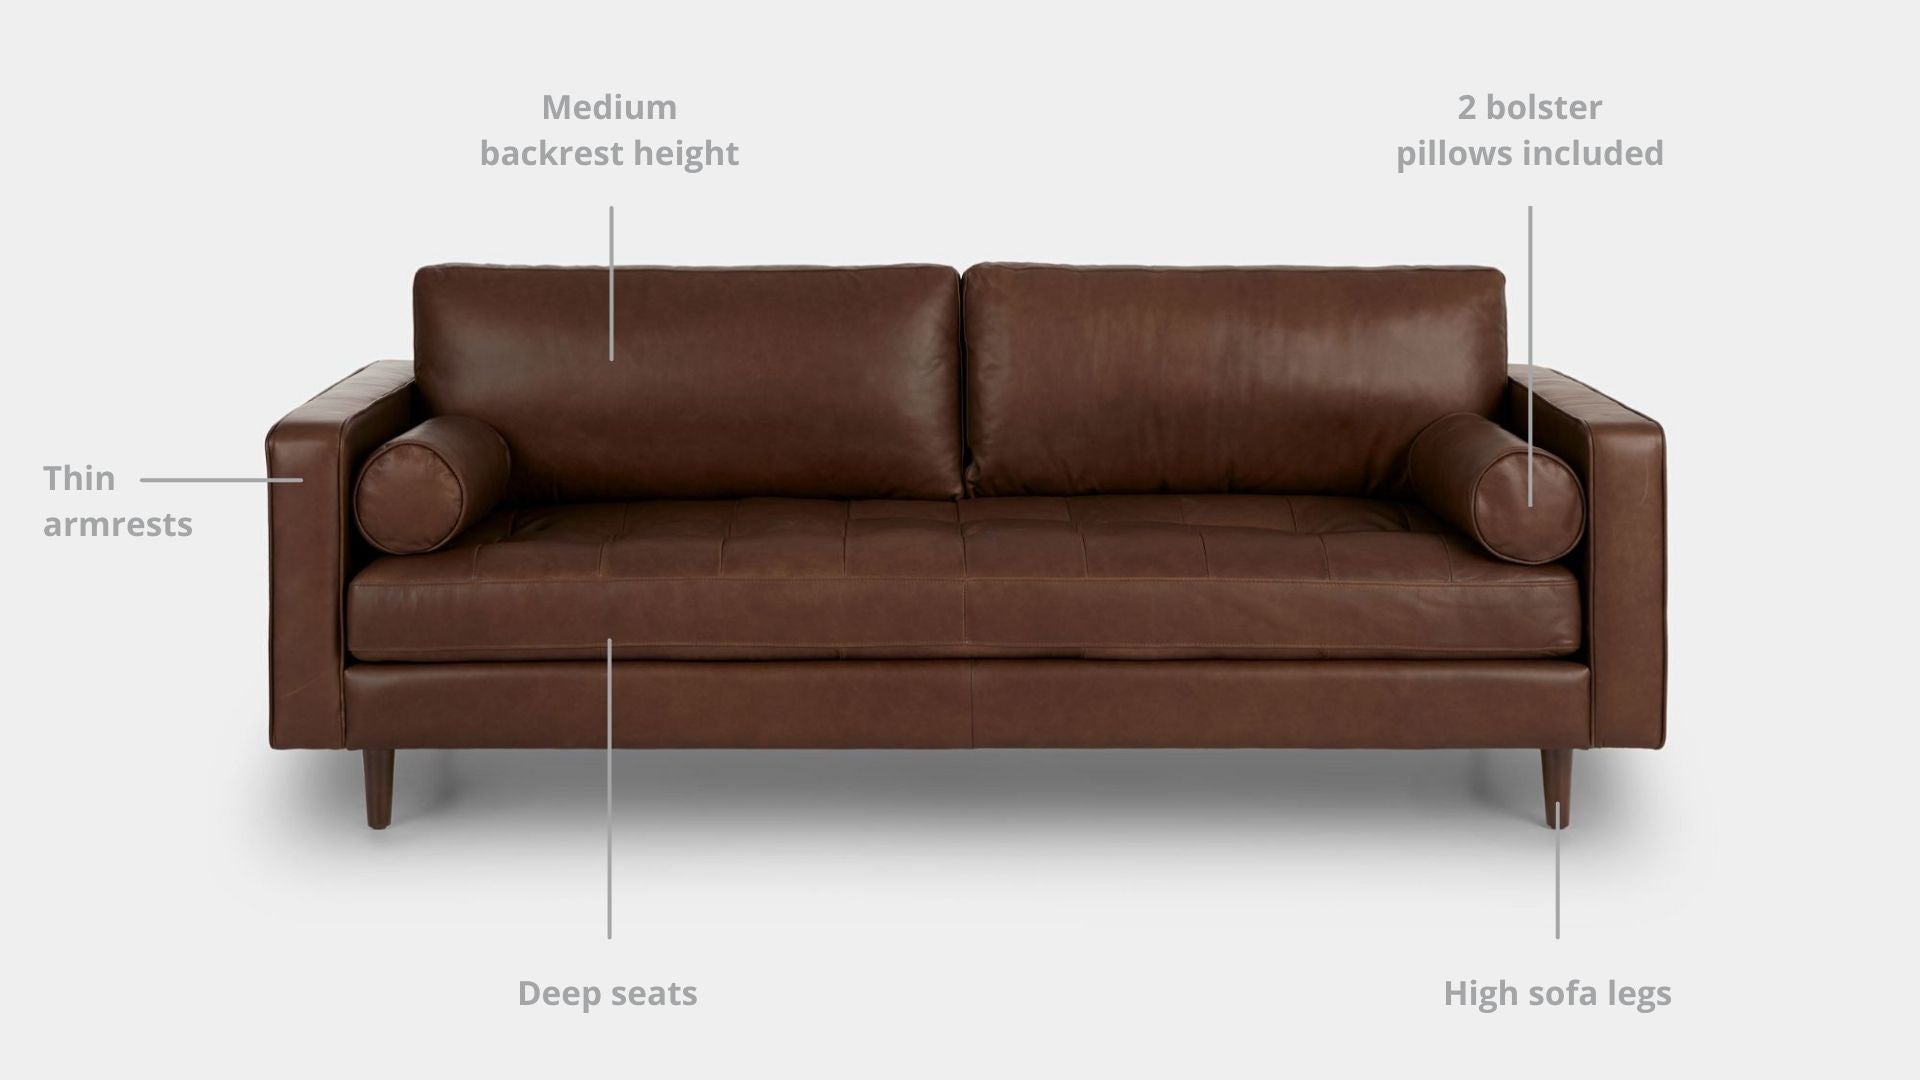 Key features such as armrest thickness, cushion height, seat depth and sofa leg height for Castle Full Leather Sofa